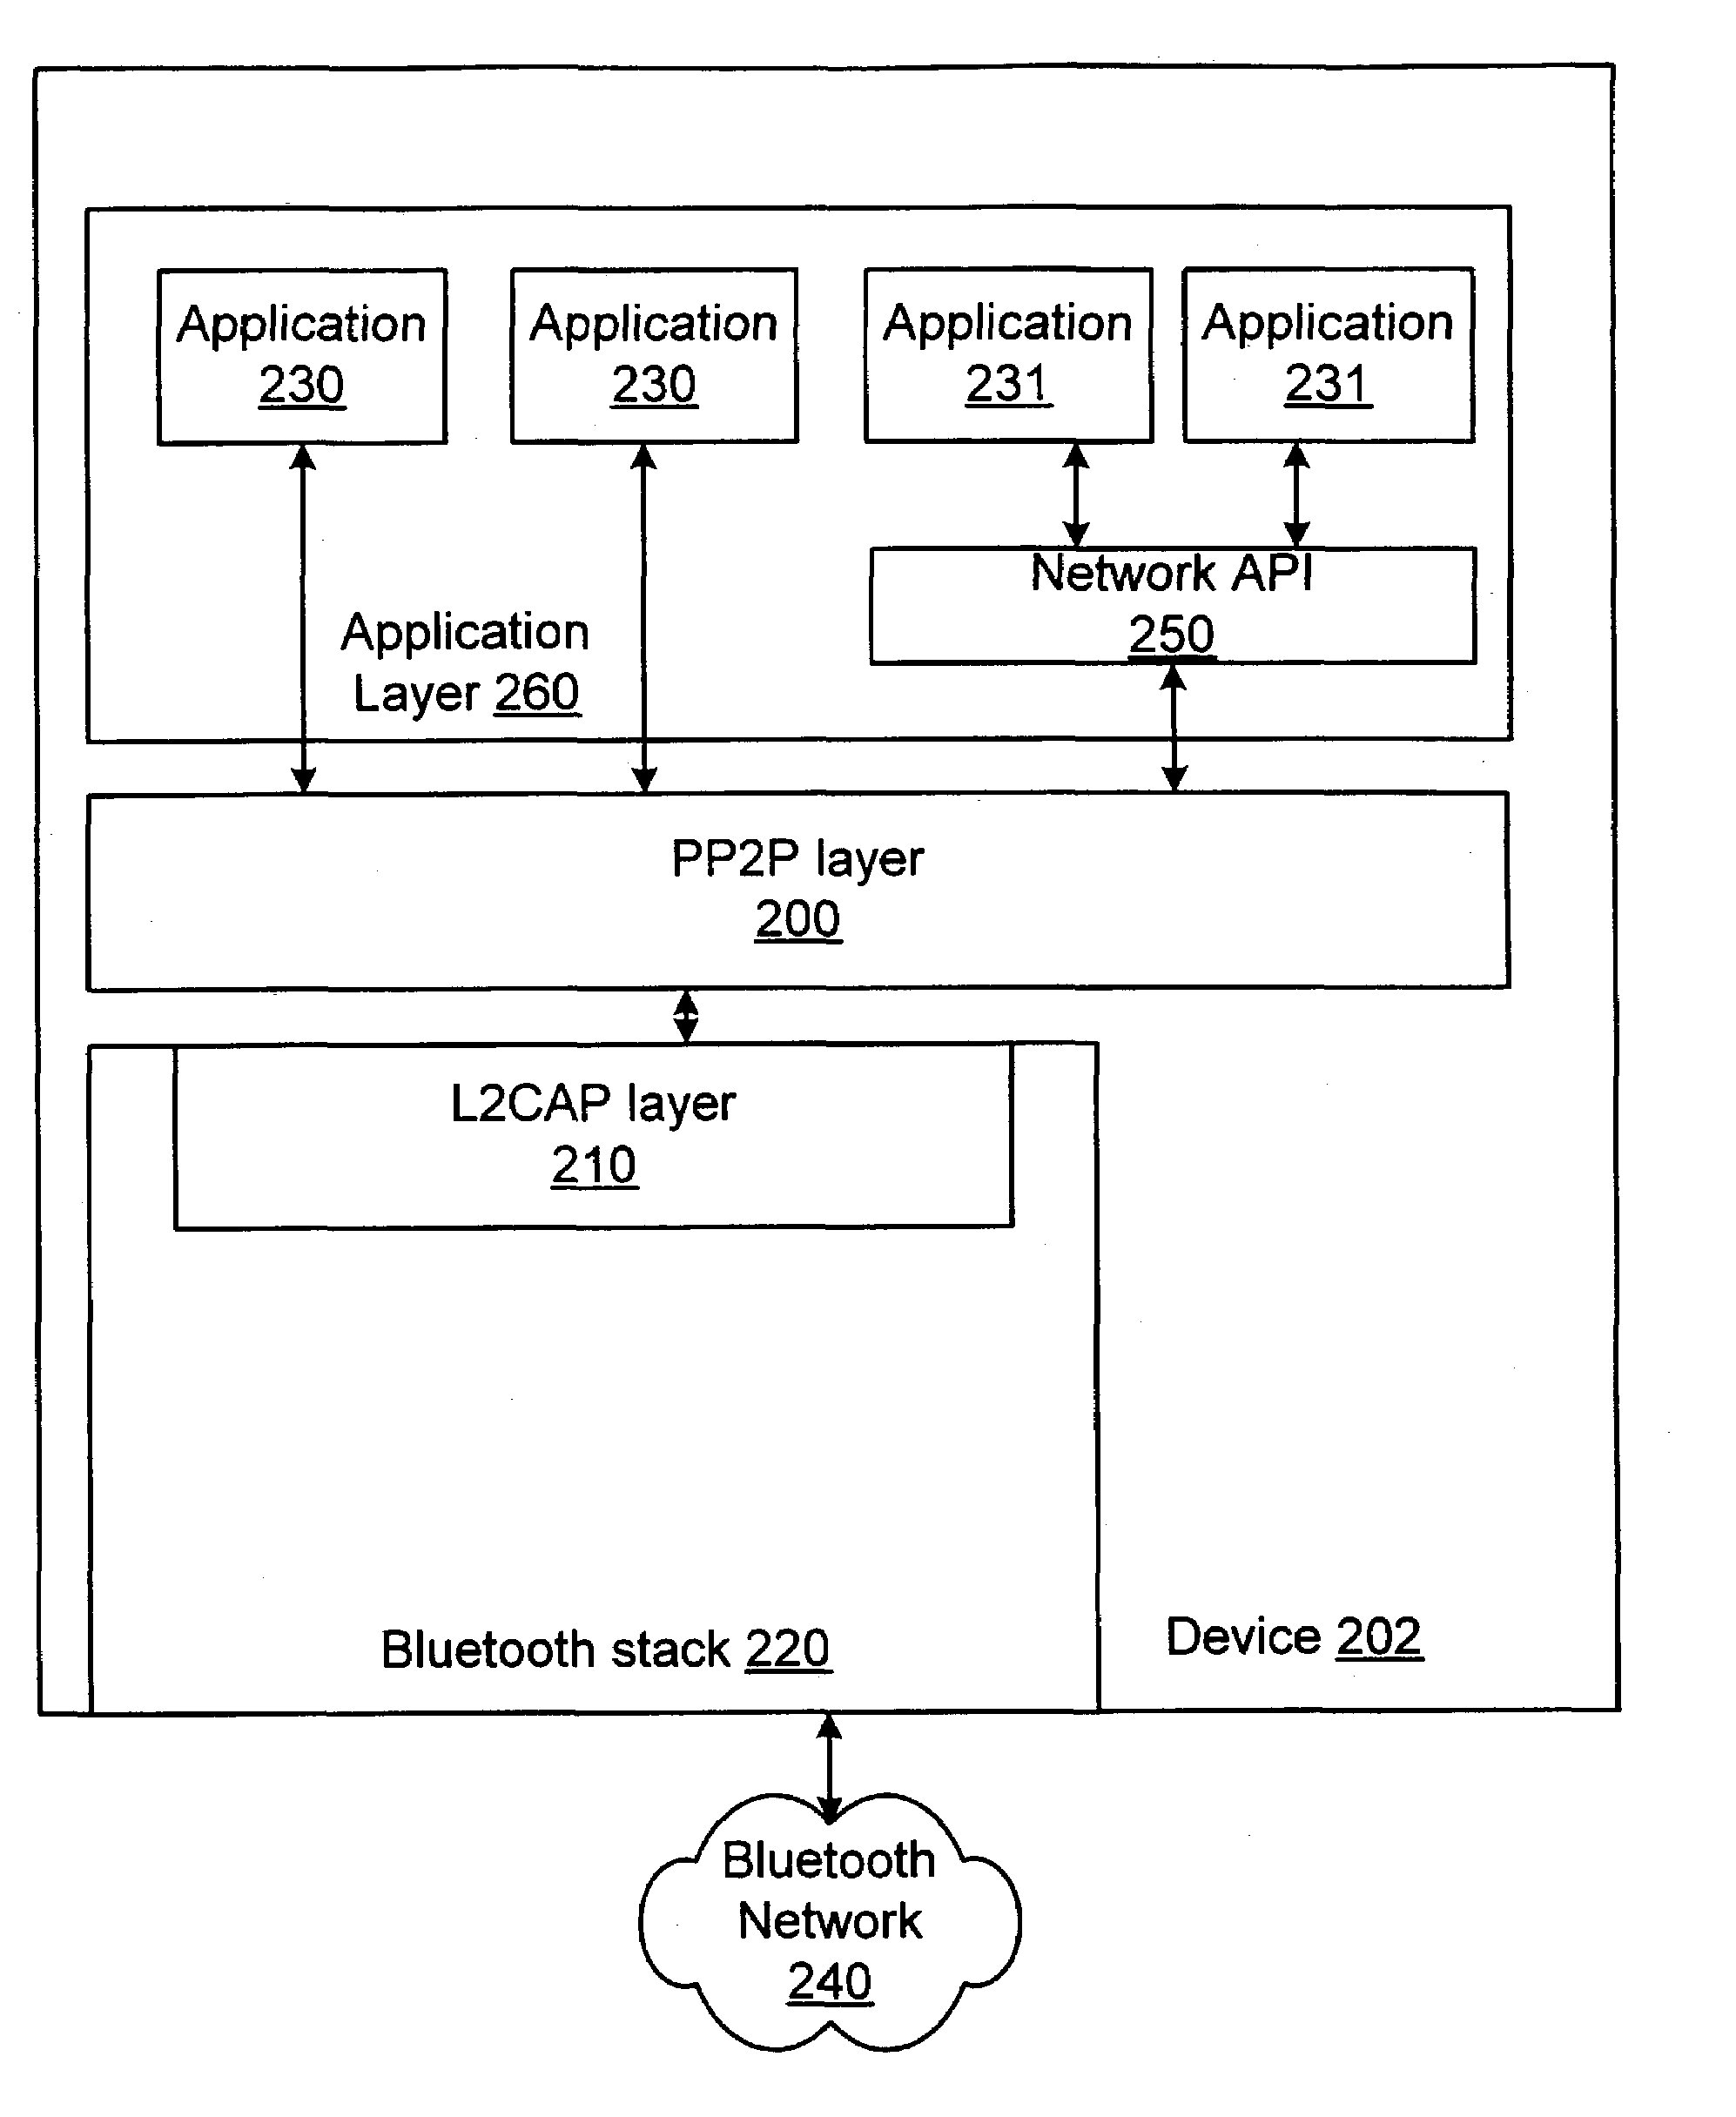 Persistent peer-to-peer networking over a piconet network